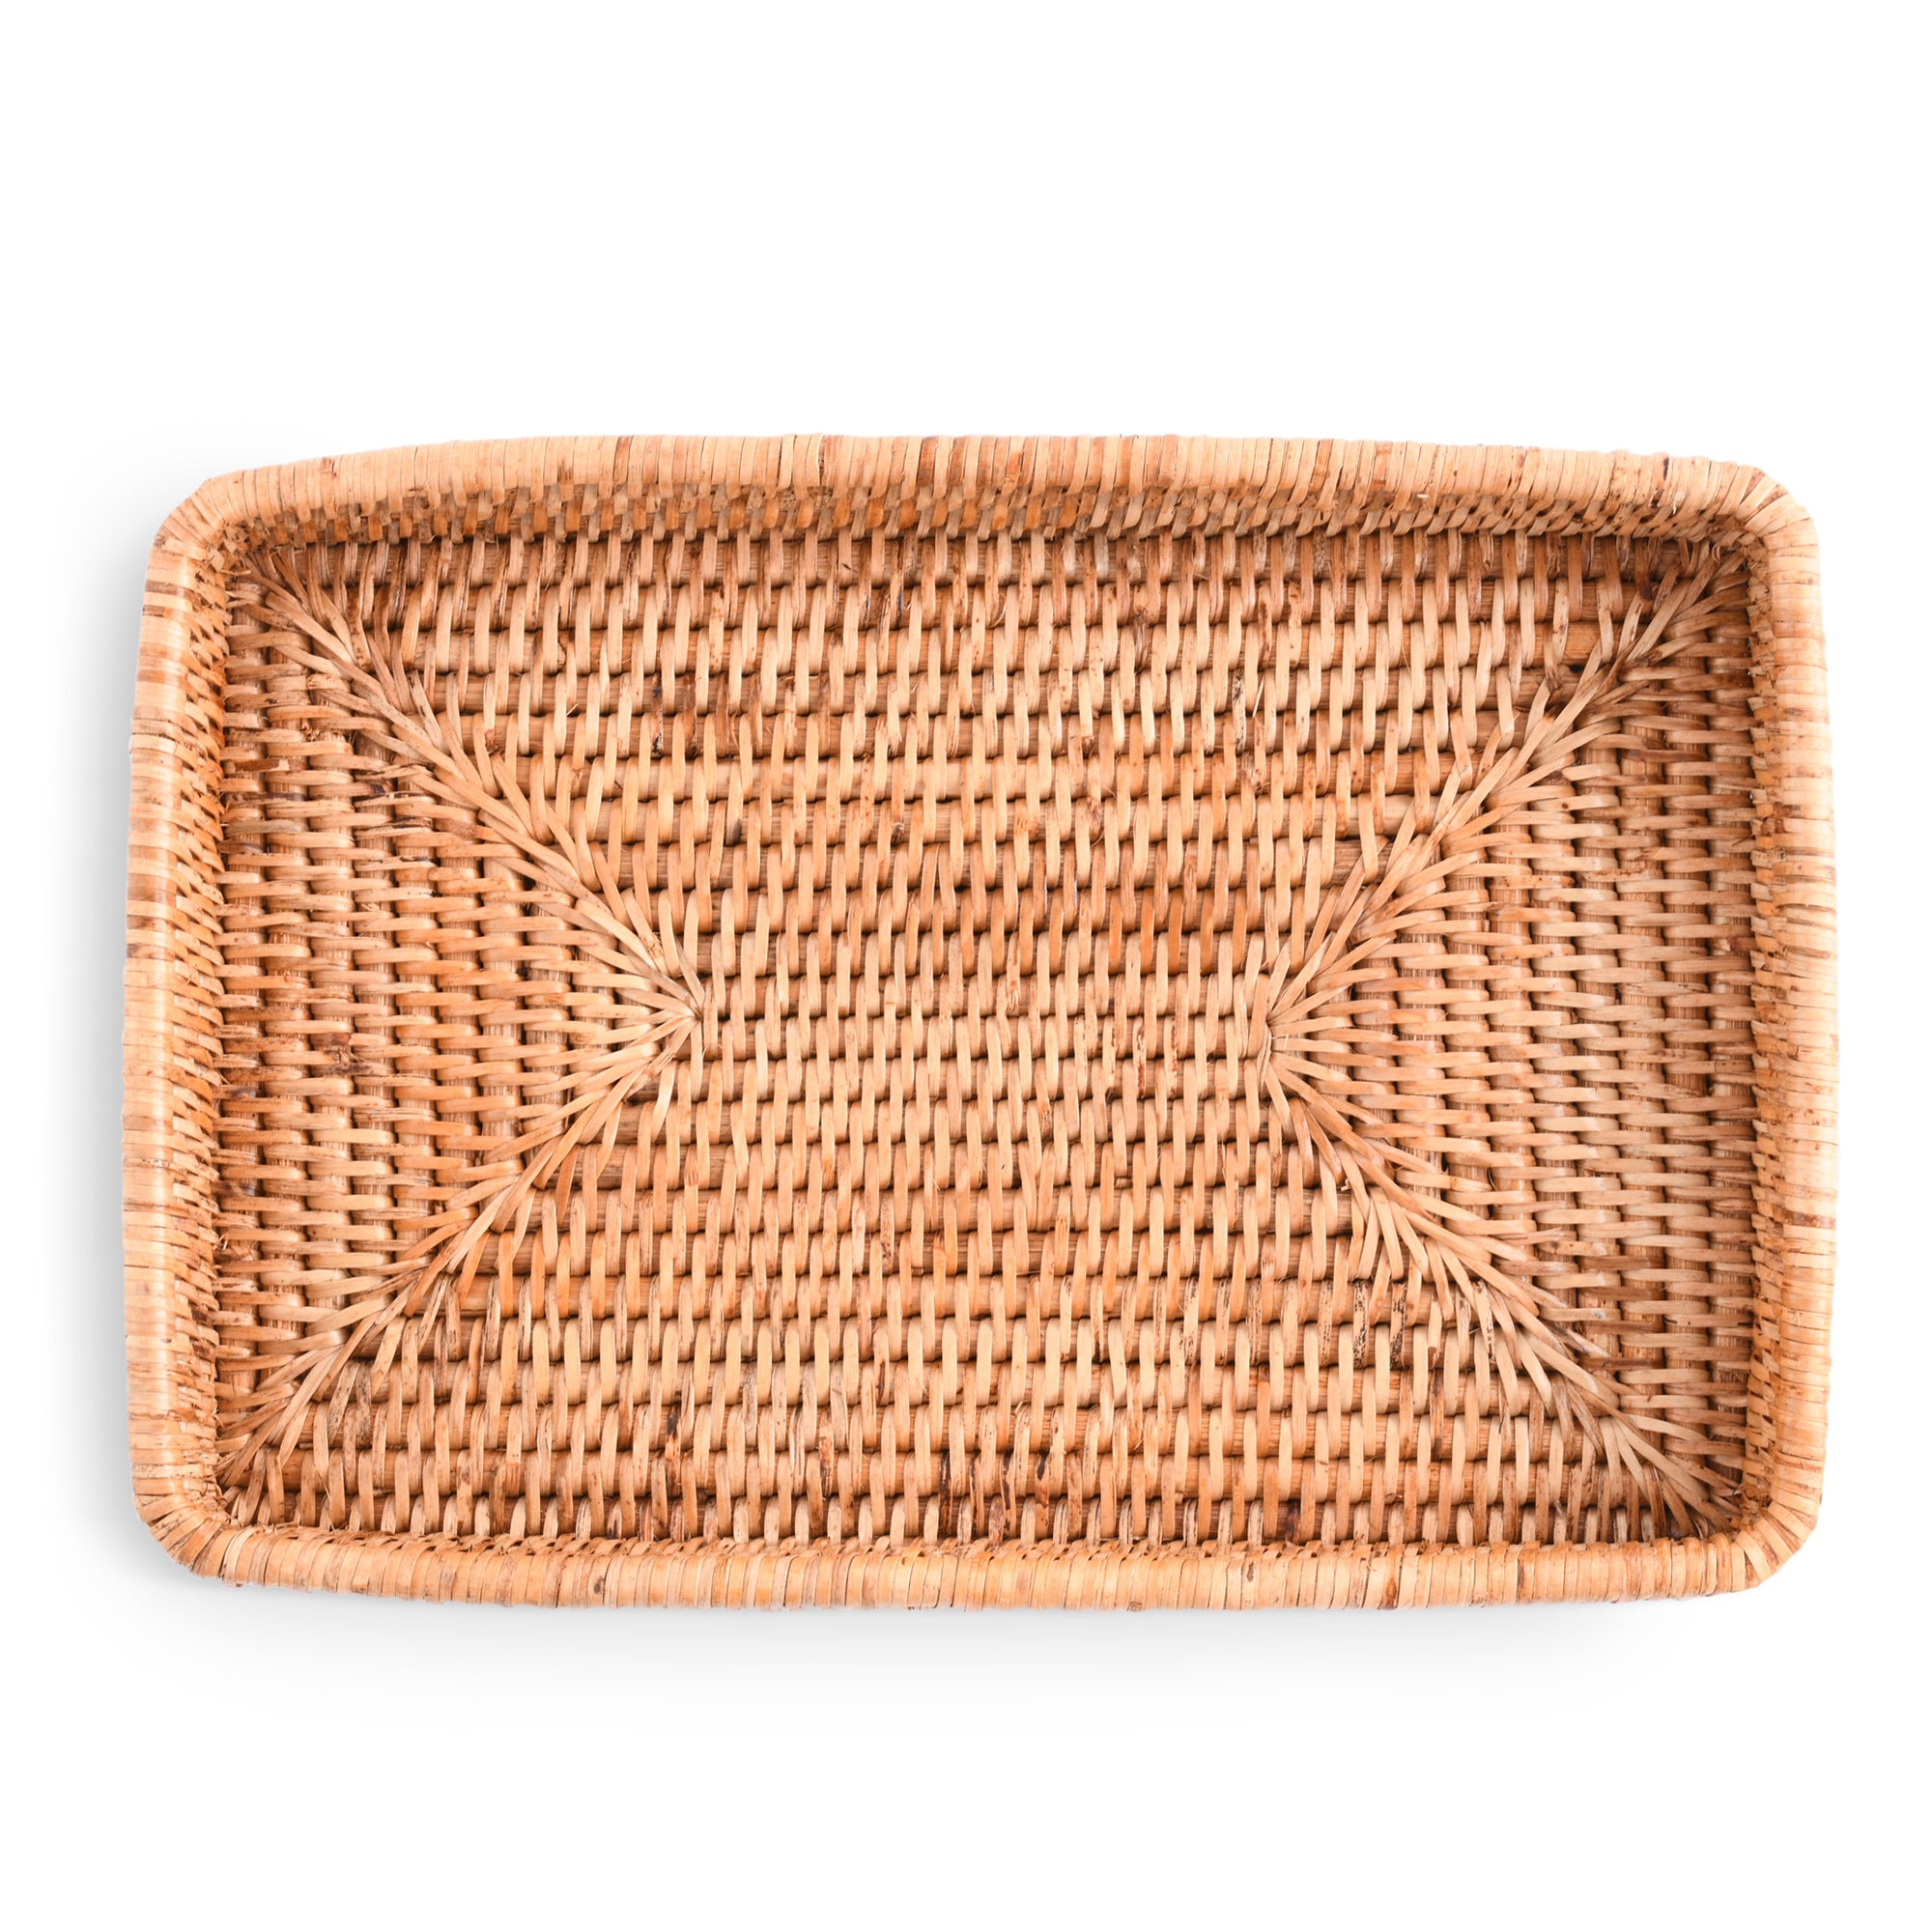 Vagabond House Catchall Tray Hand Woven Wicker Rattan Product Image